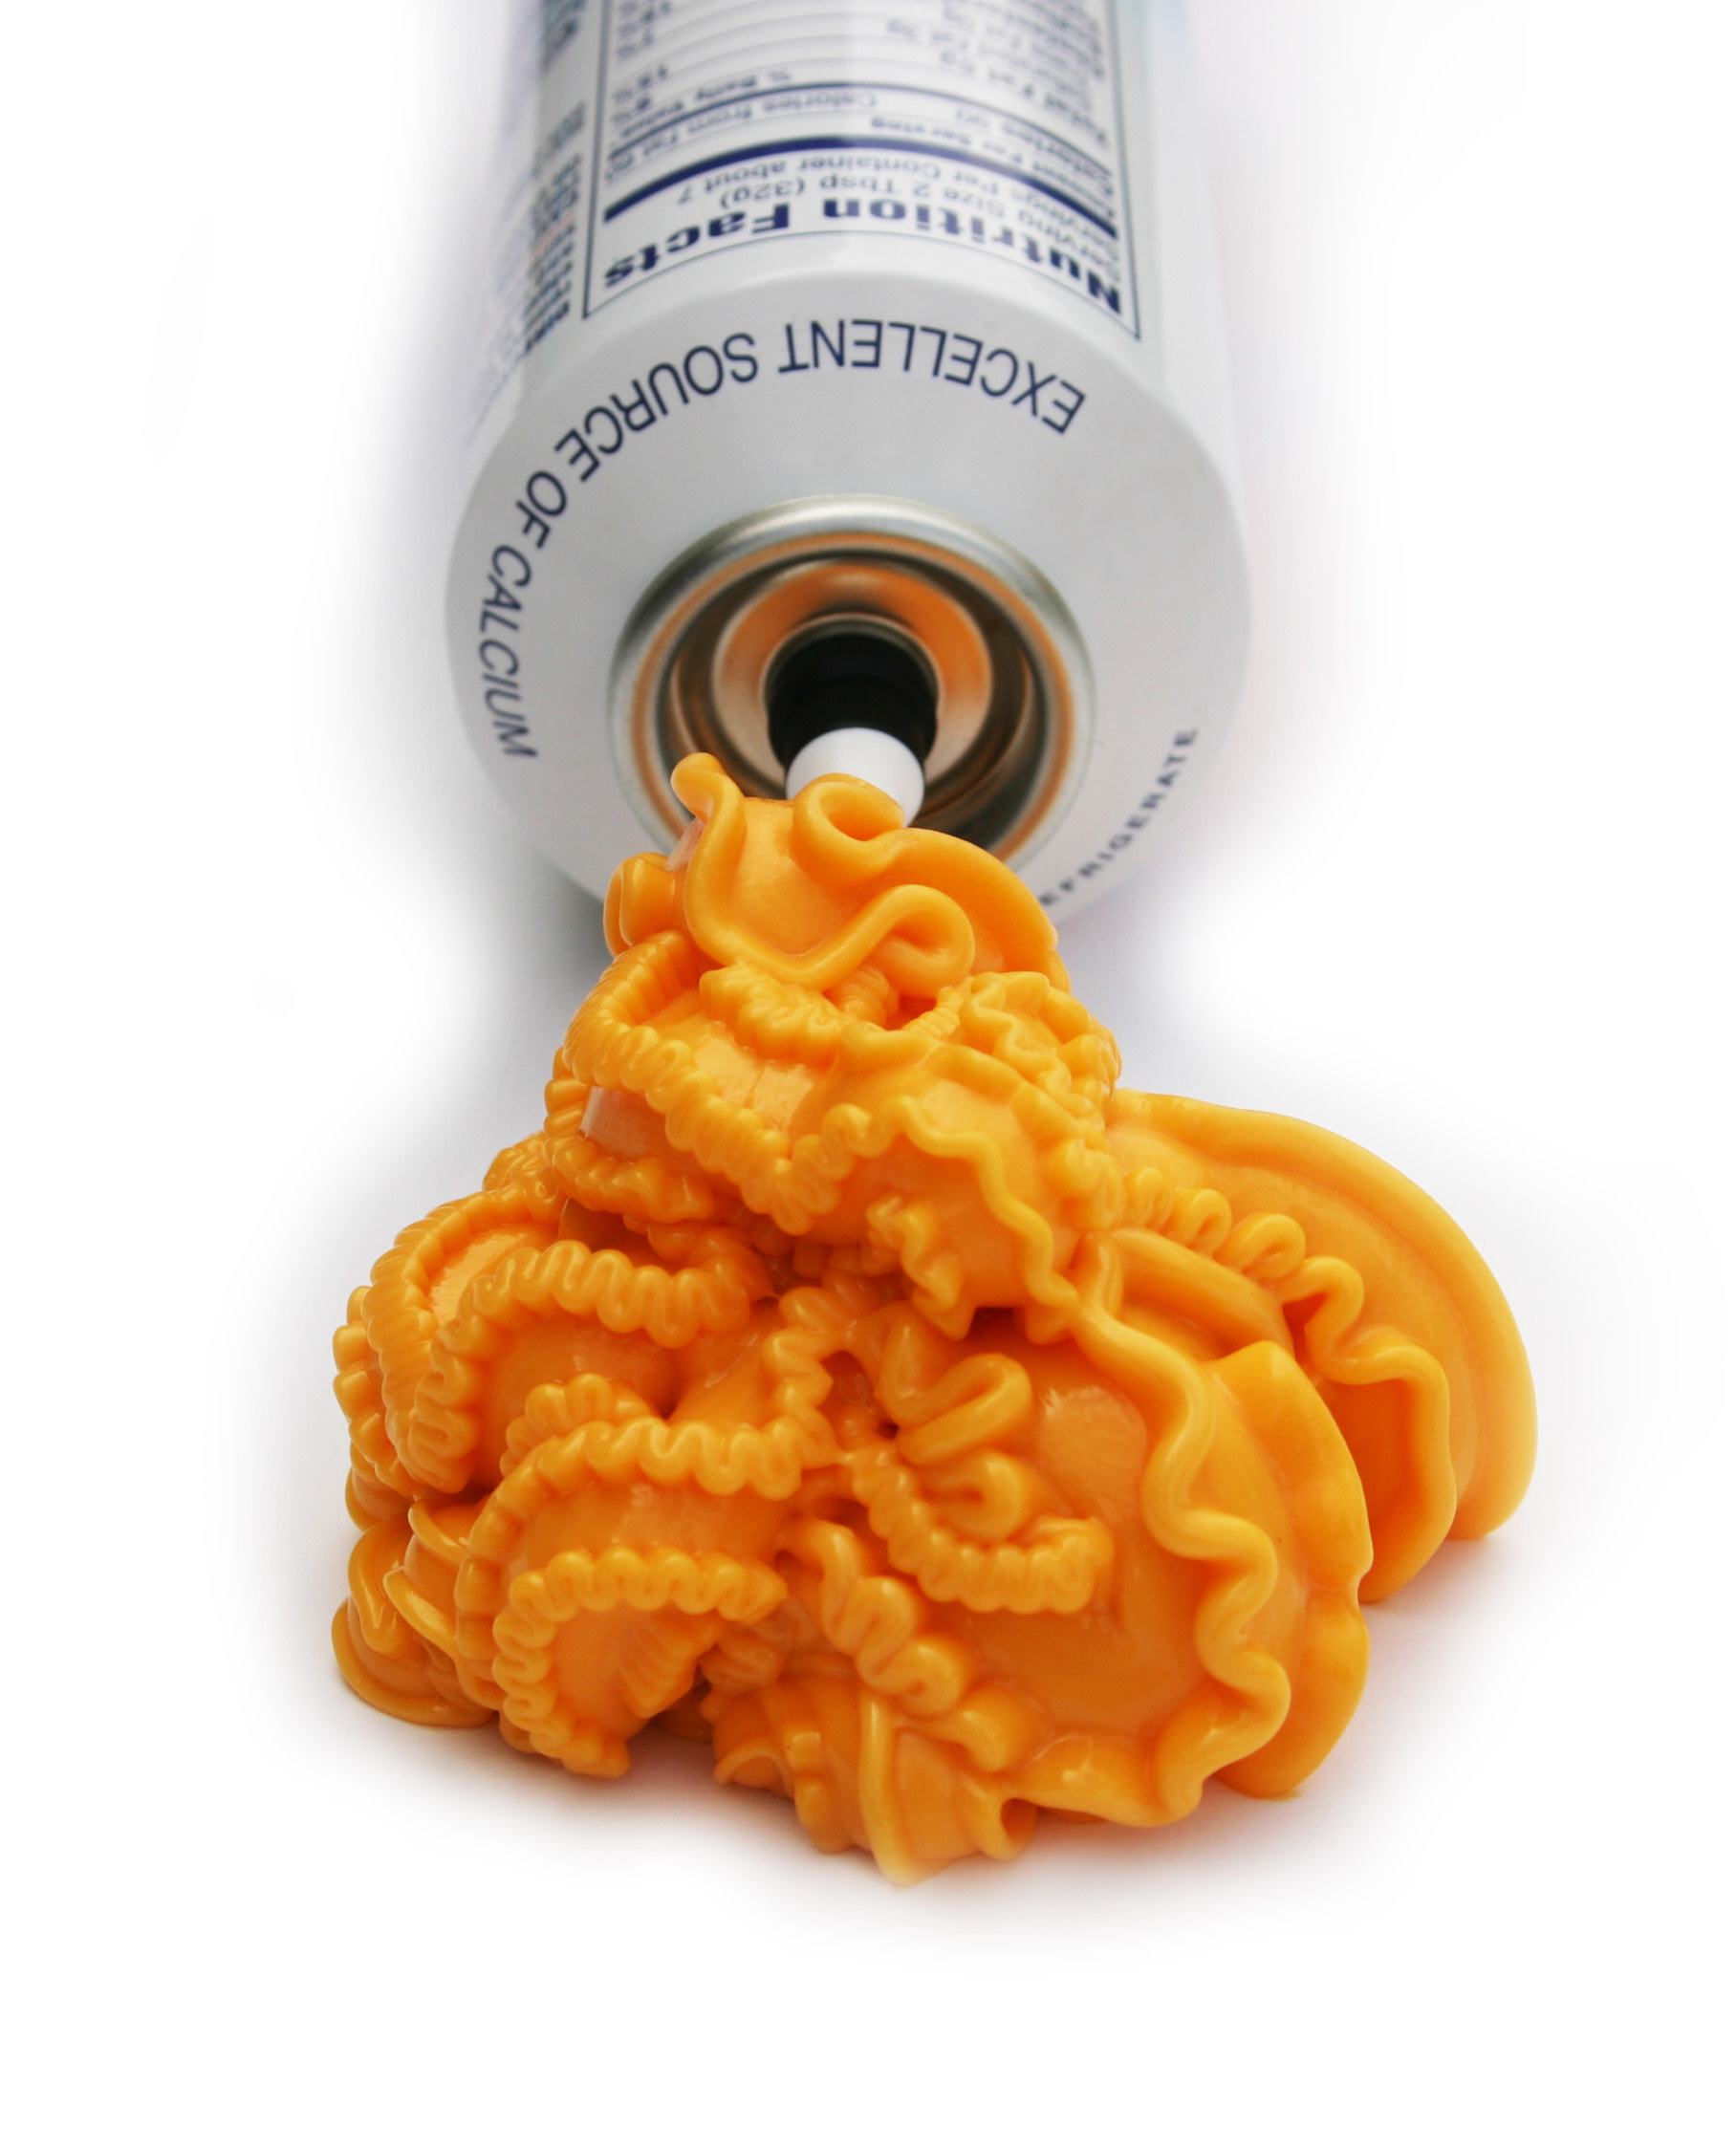 An opened tube of orange spray cheese with a large amount coming out, shaped intricately, against a white background